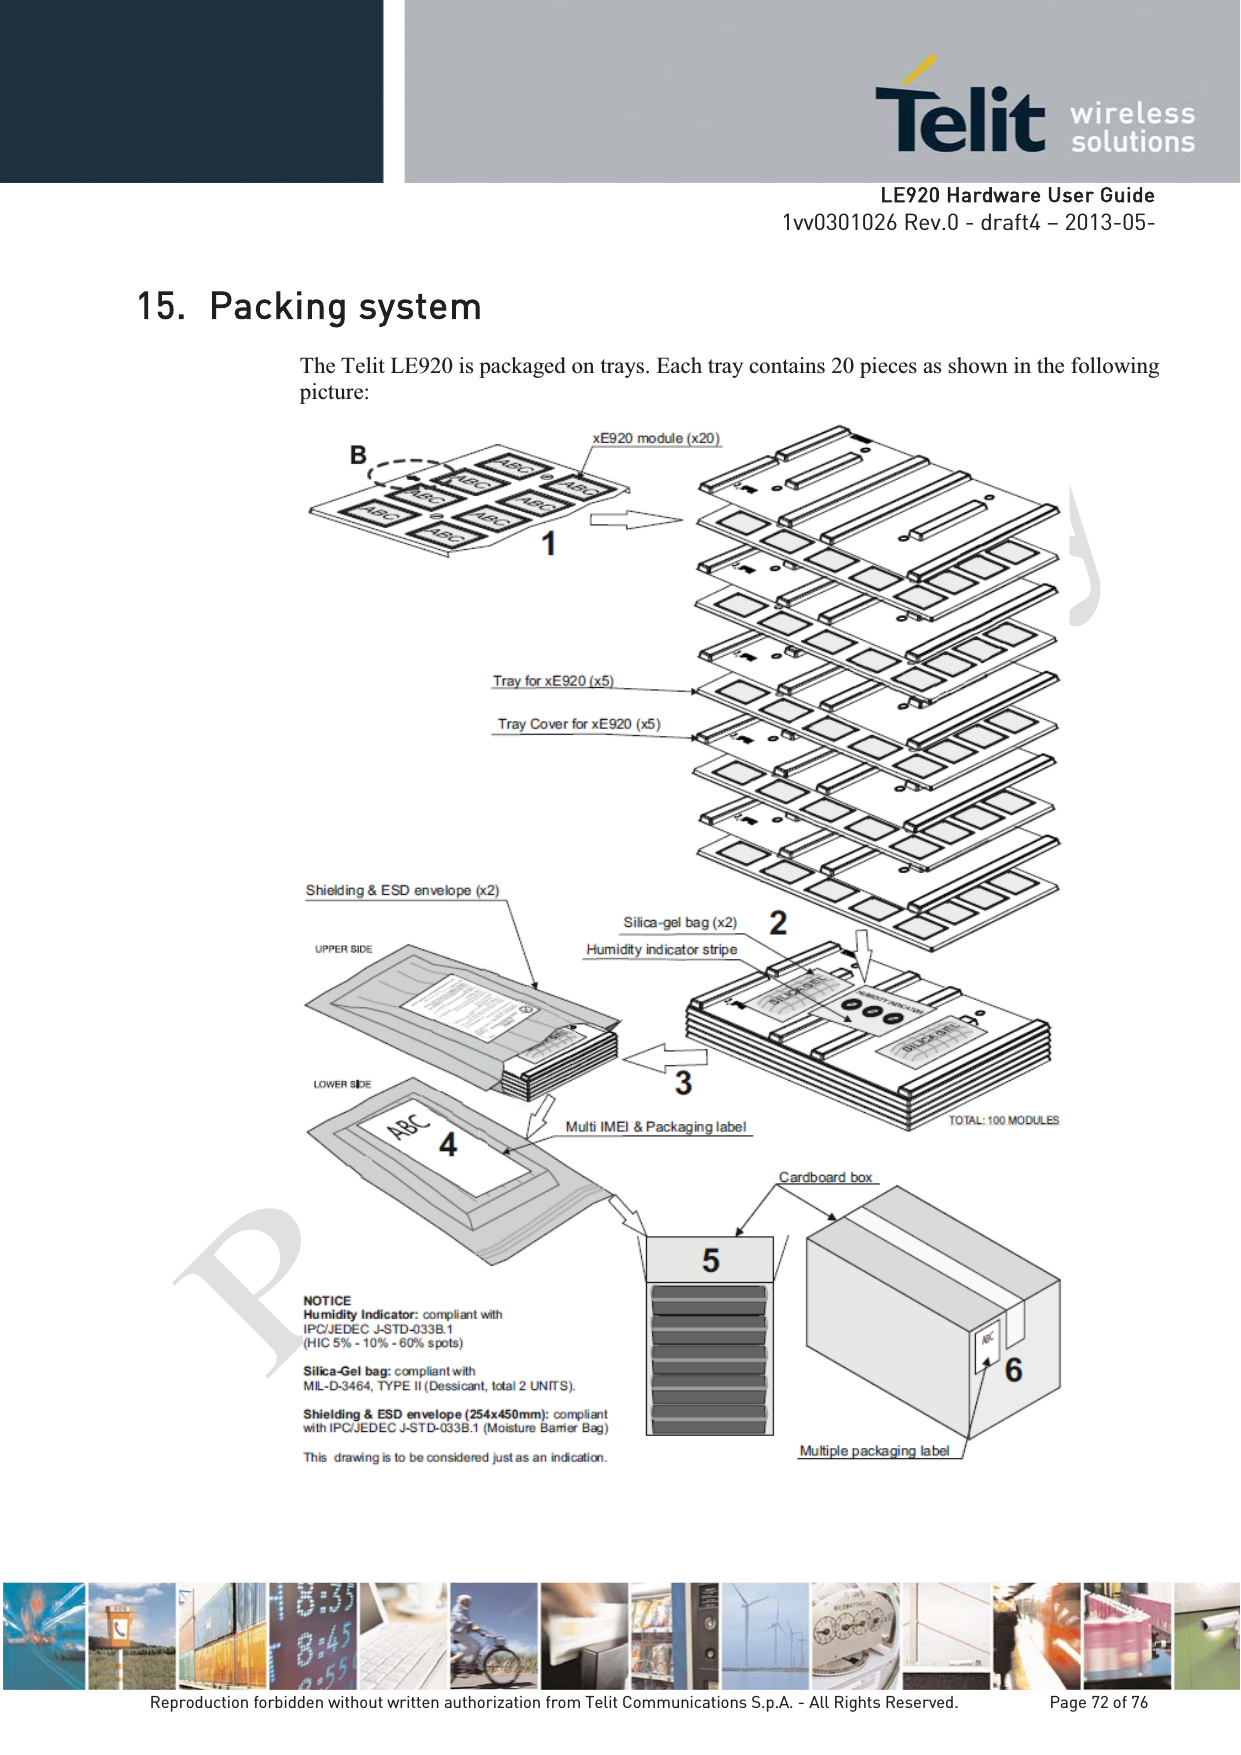   LLE920 Hardware User Guide1vv0301026 Rev.0 - draft4 – 2013-05-Reproduction forbidden without written authorization from Telit Communications S.p.A. - All Rights Reserved.    Page 72 of 76 15. Packing system The Telit LE920 is packaged on trays. Each tray contains 20 pieces as shown in the following picture:  